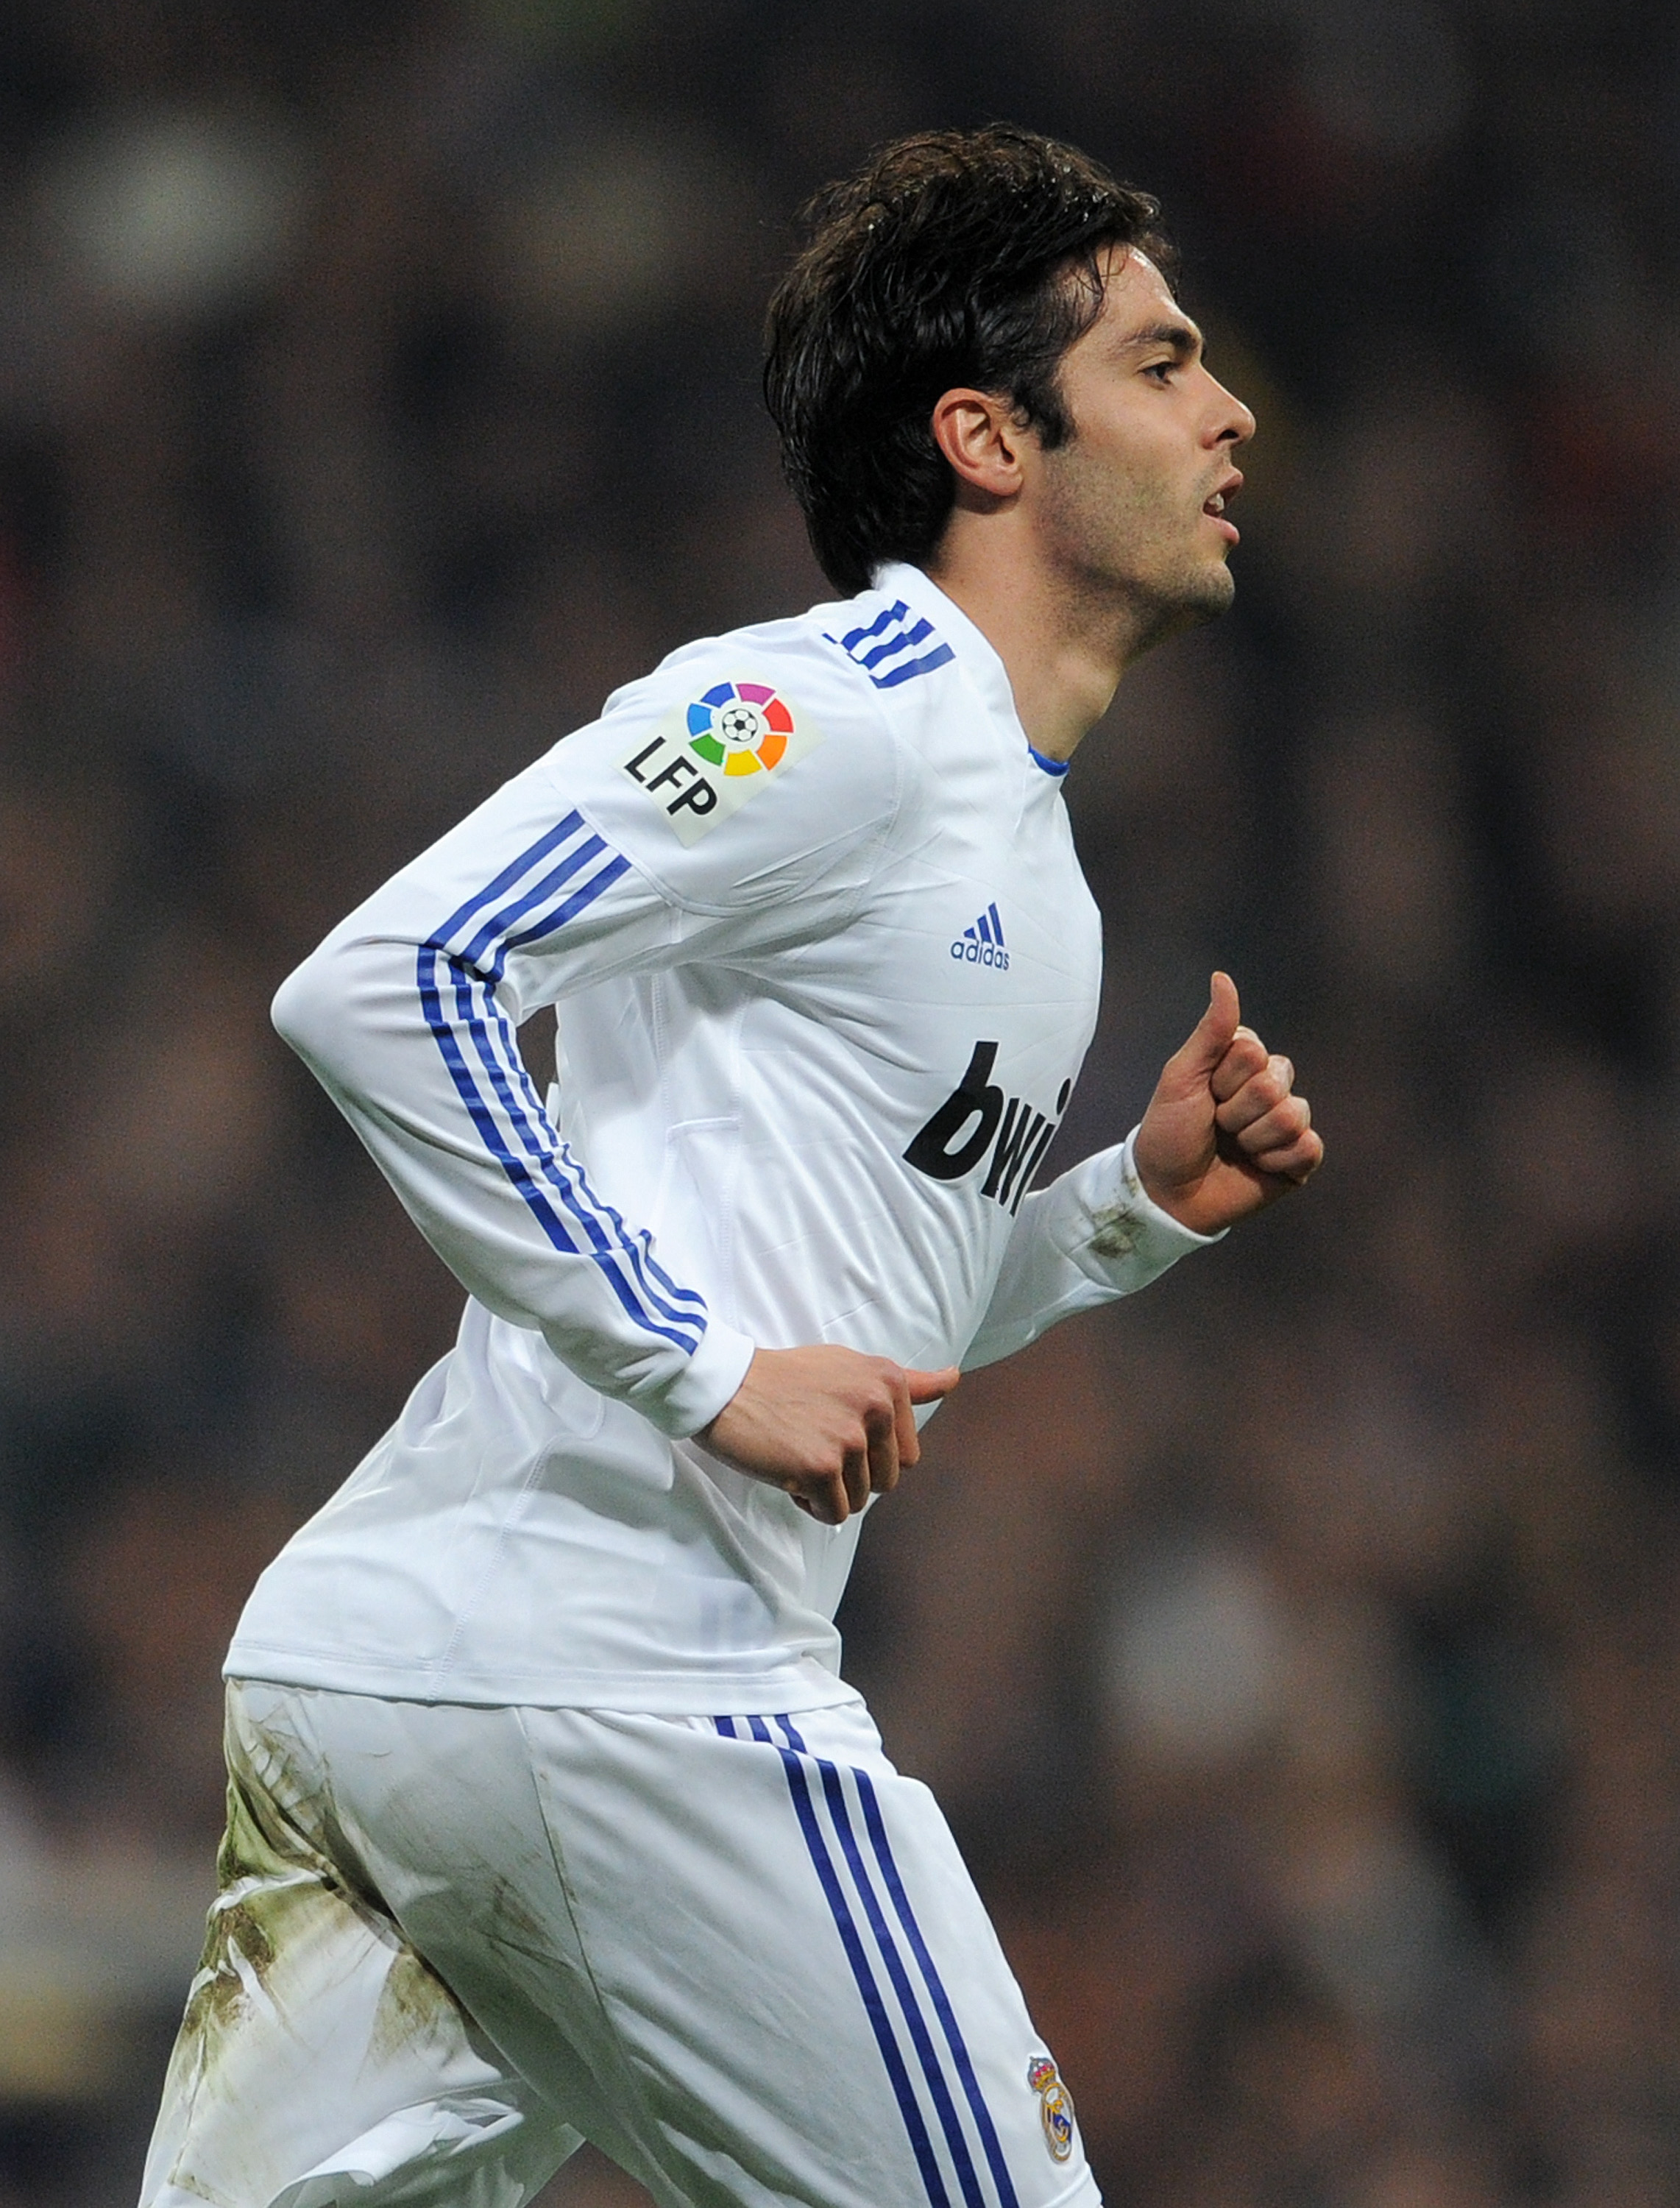 MADRID, SPAIN - JANUARY 13:  Kaka of Real Madrid looks on during the quarter-final Copa del Rey first leg match between Real Madrid and Atletico Madrid at Estadio Santiago Bernabeu on January 13, 2011 in Madrid, Spain.  (Photo by Jasper Juinen/Getty Image